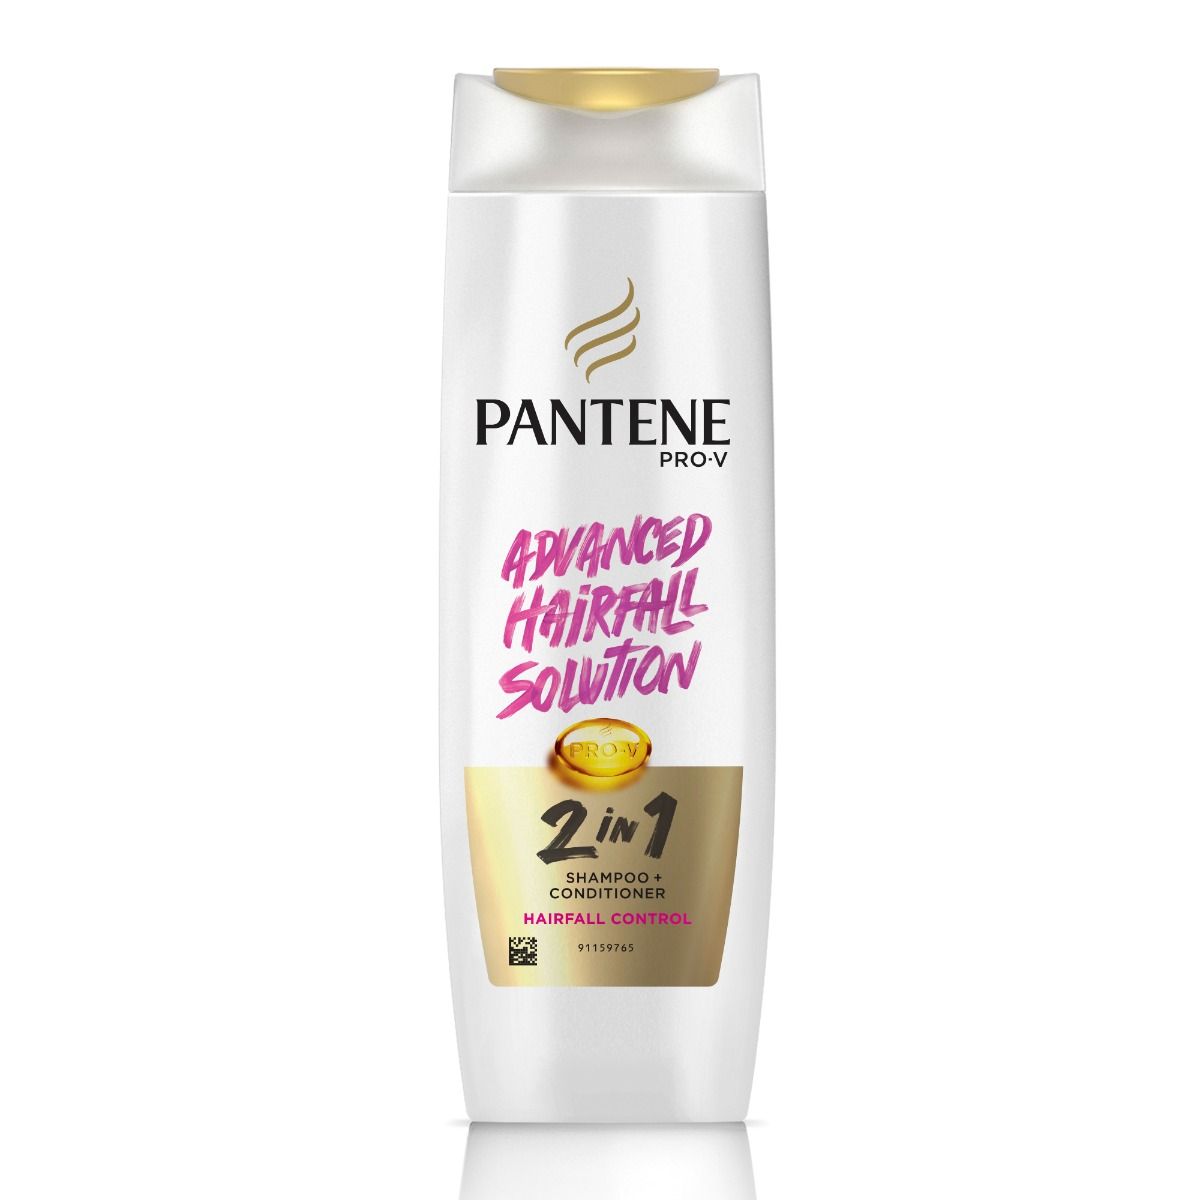 Pantene Pro-V 2 In 1 Hair Fall Control Shampoo + Conditioner, 180 ml Price,  Uses, Side Effects, Composition - Apollo Pharmacy